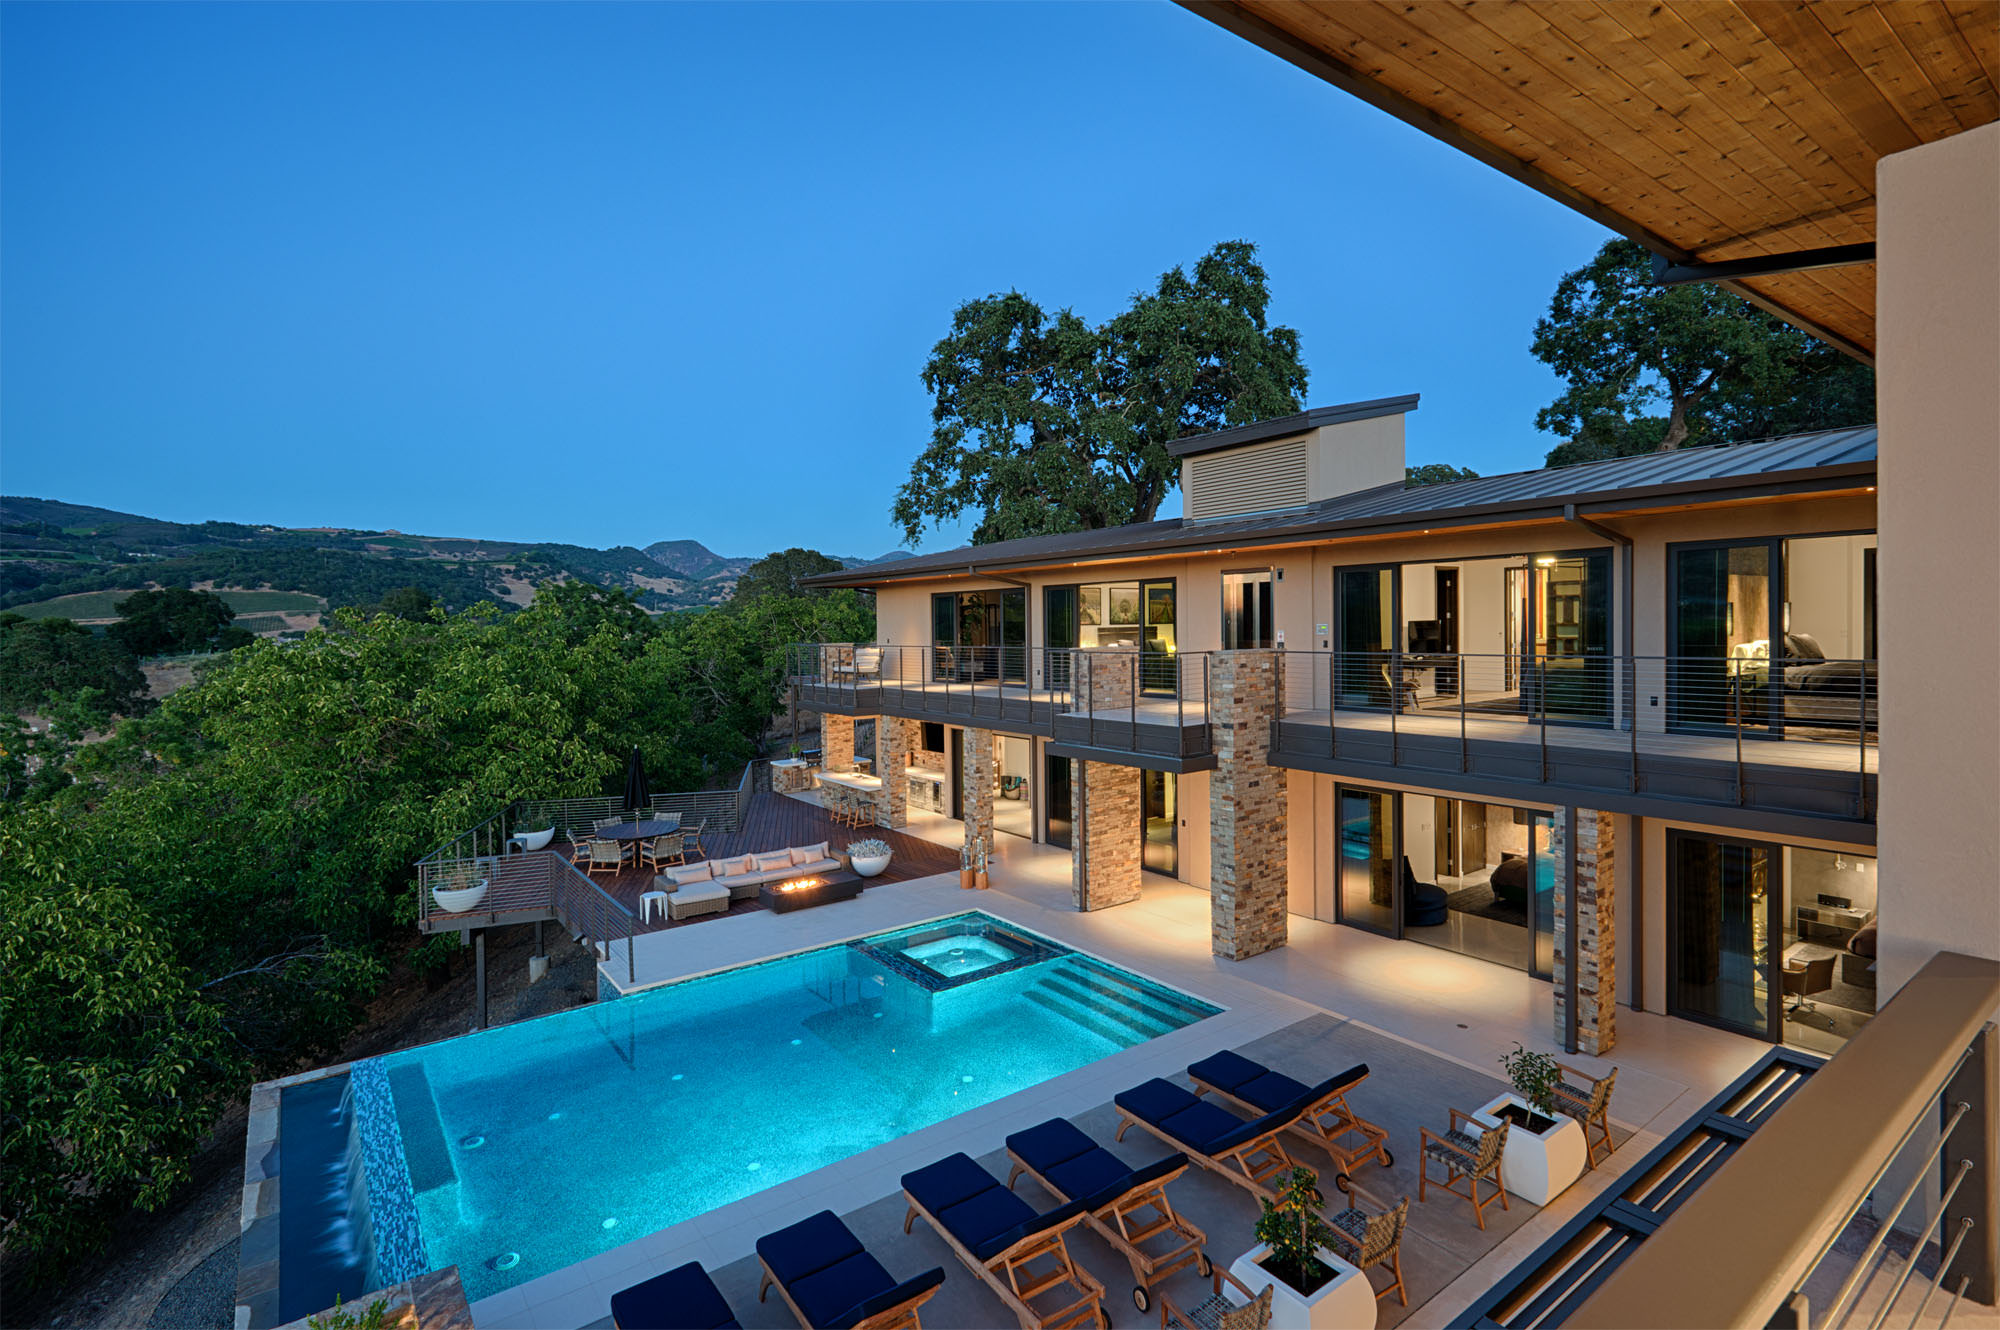 Infinity pool and deck overlooking vineyards at Oakville hillside residence